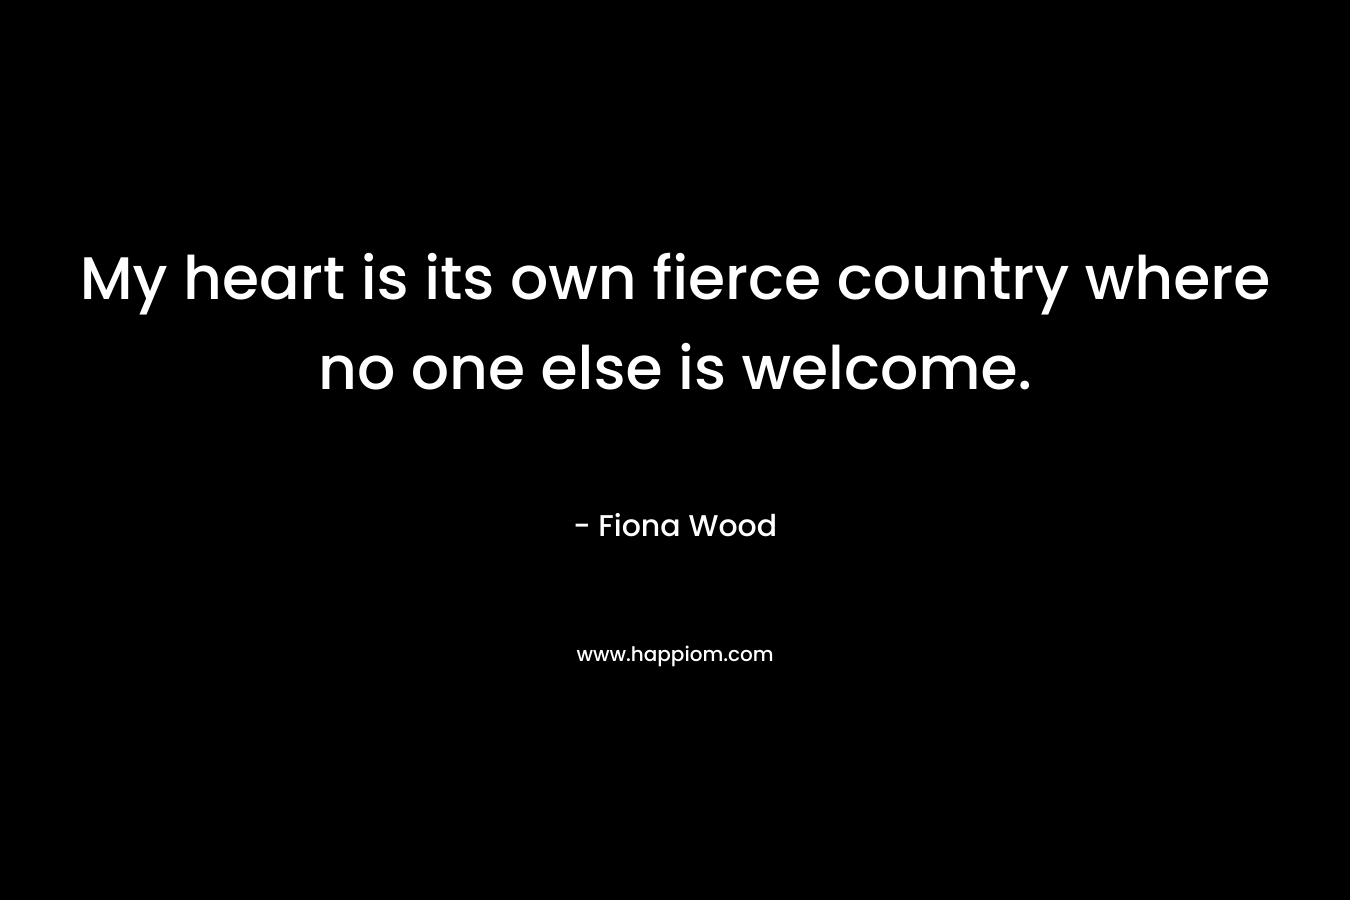 My heart is its own fierce country where no one else is welcome. – Fiona Wood